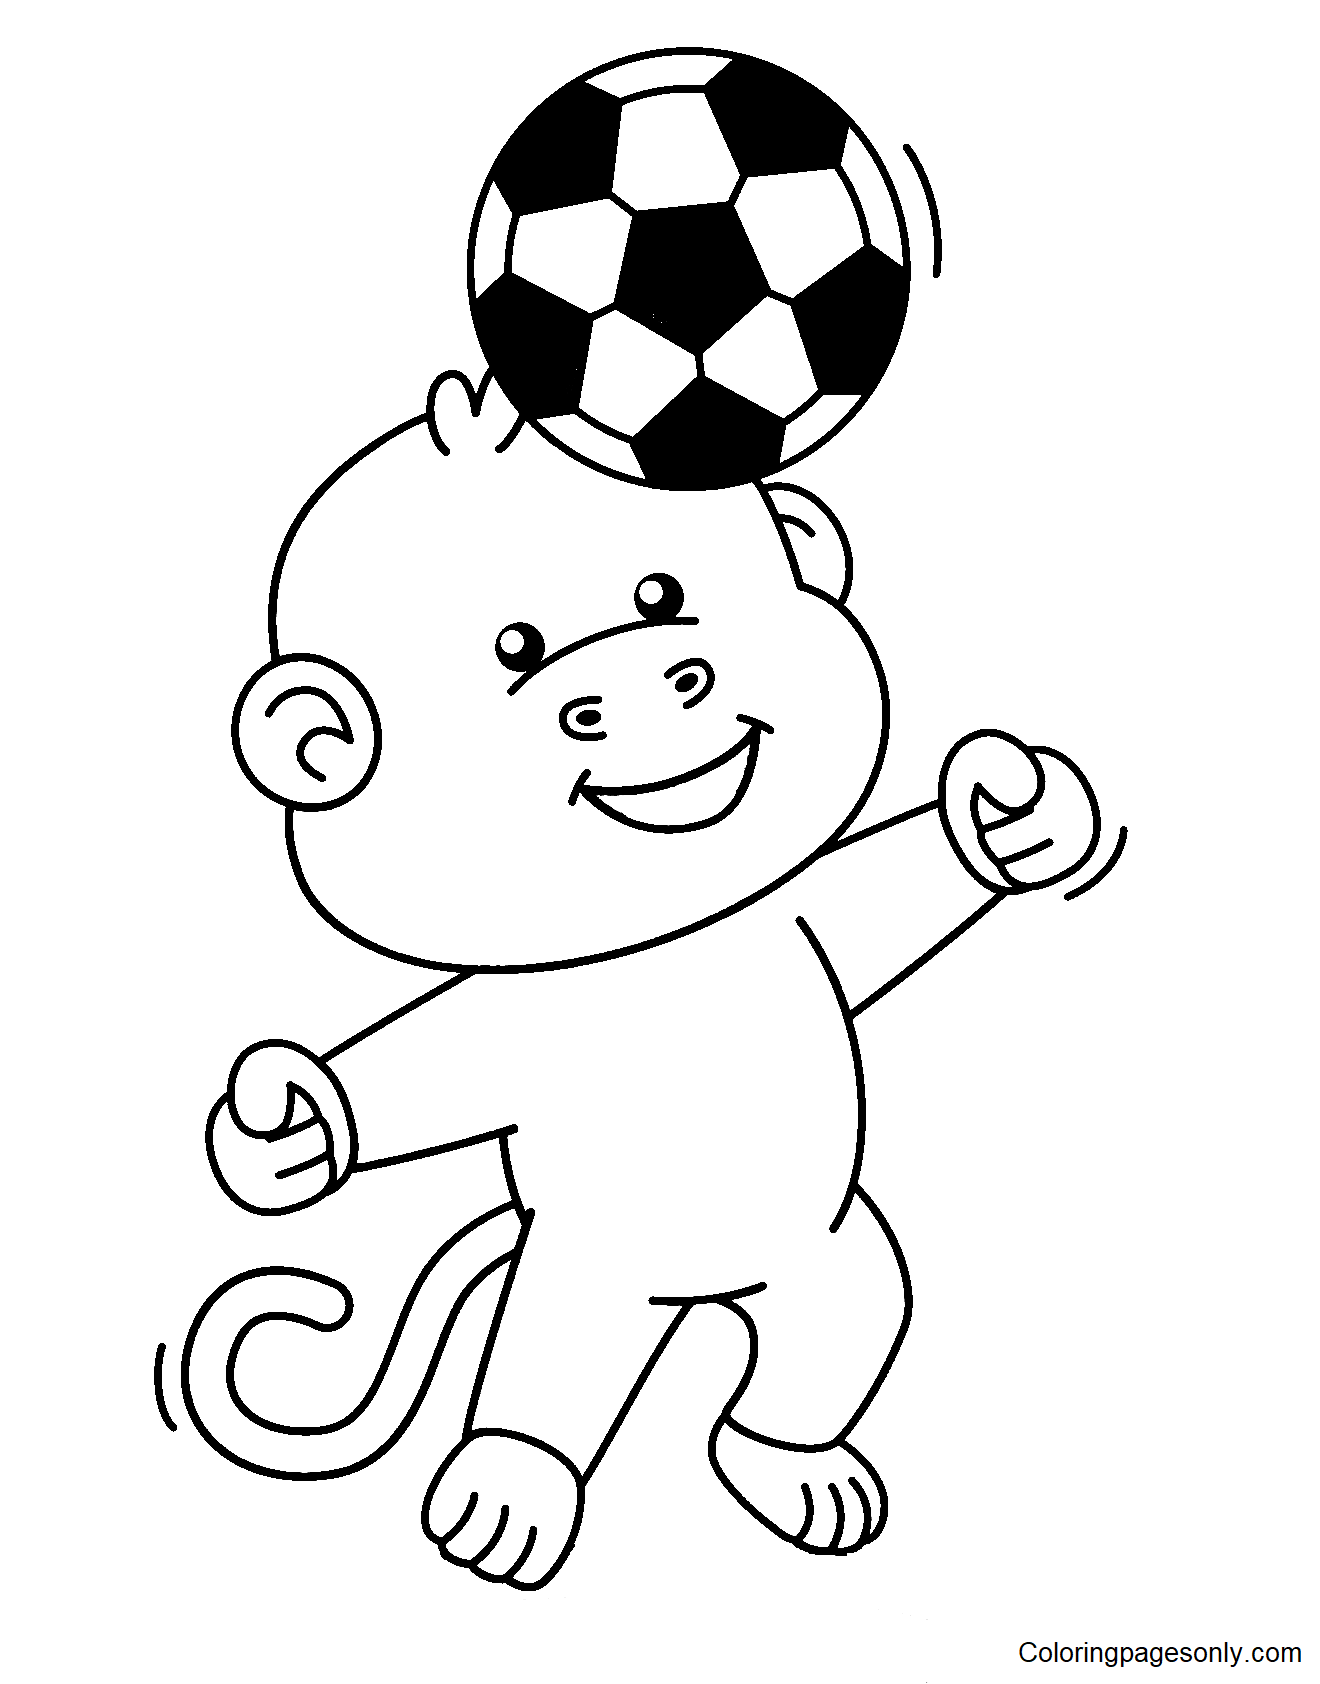 Cute Monkey Playing Soccer Coloring Pages